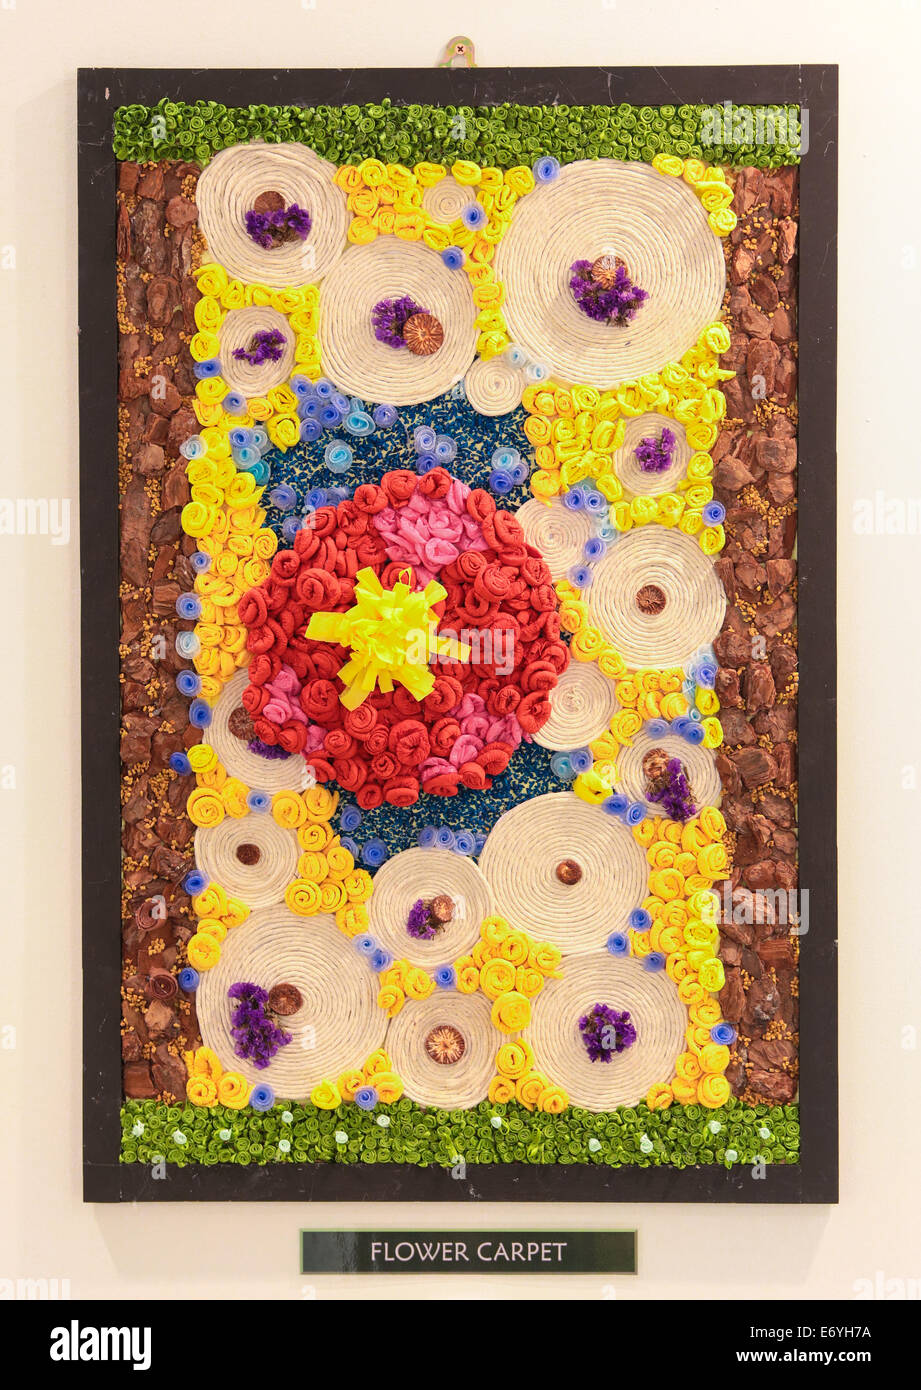 Picture made of nature elements such as flower and beans at FLORIA event held in Putrajaya, Malaysia. Stock Photo